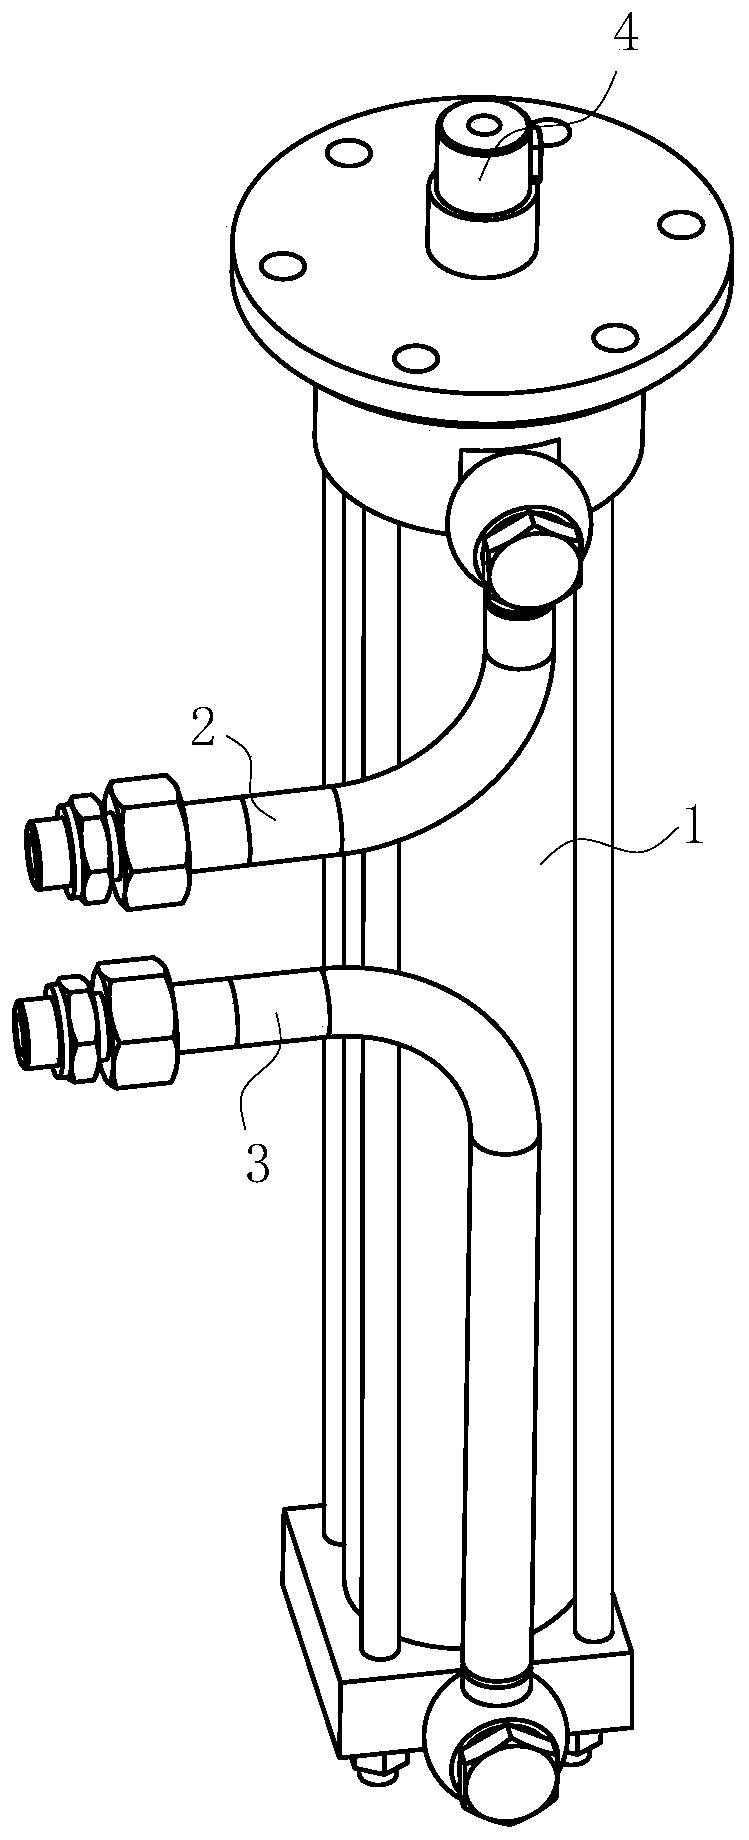 Static pressure supporting and guiding hydraulic cylinder